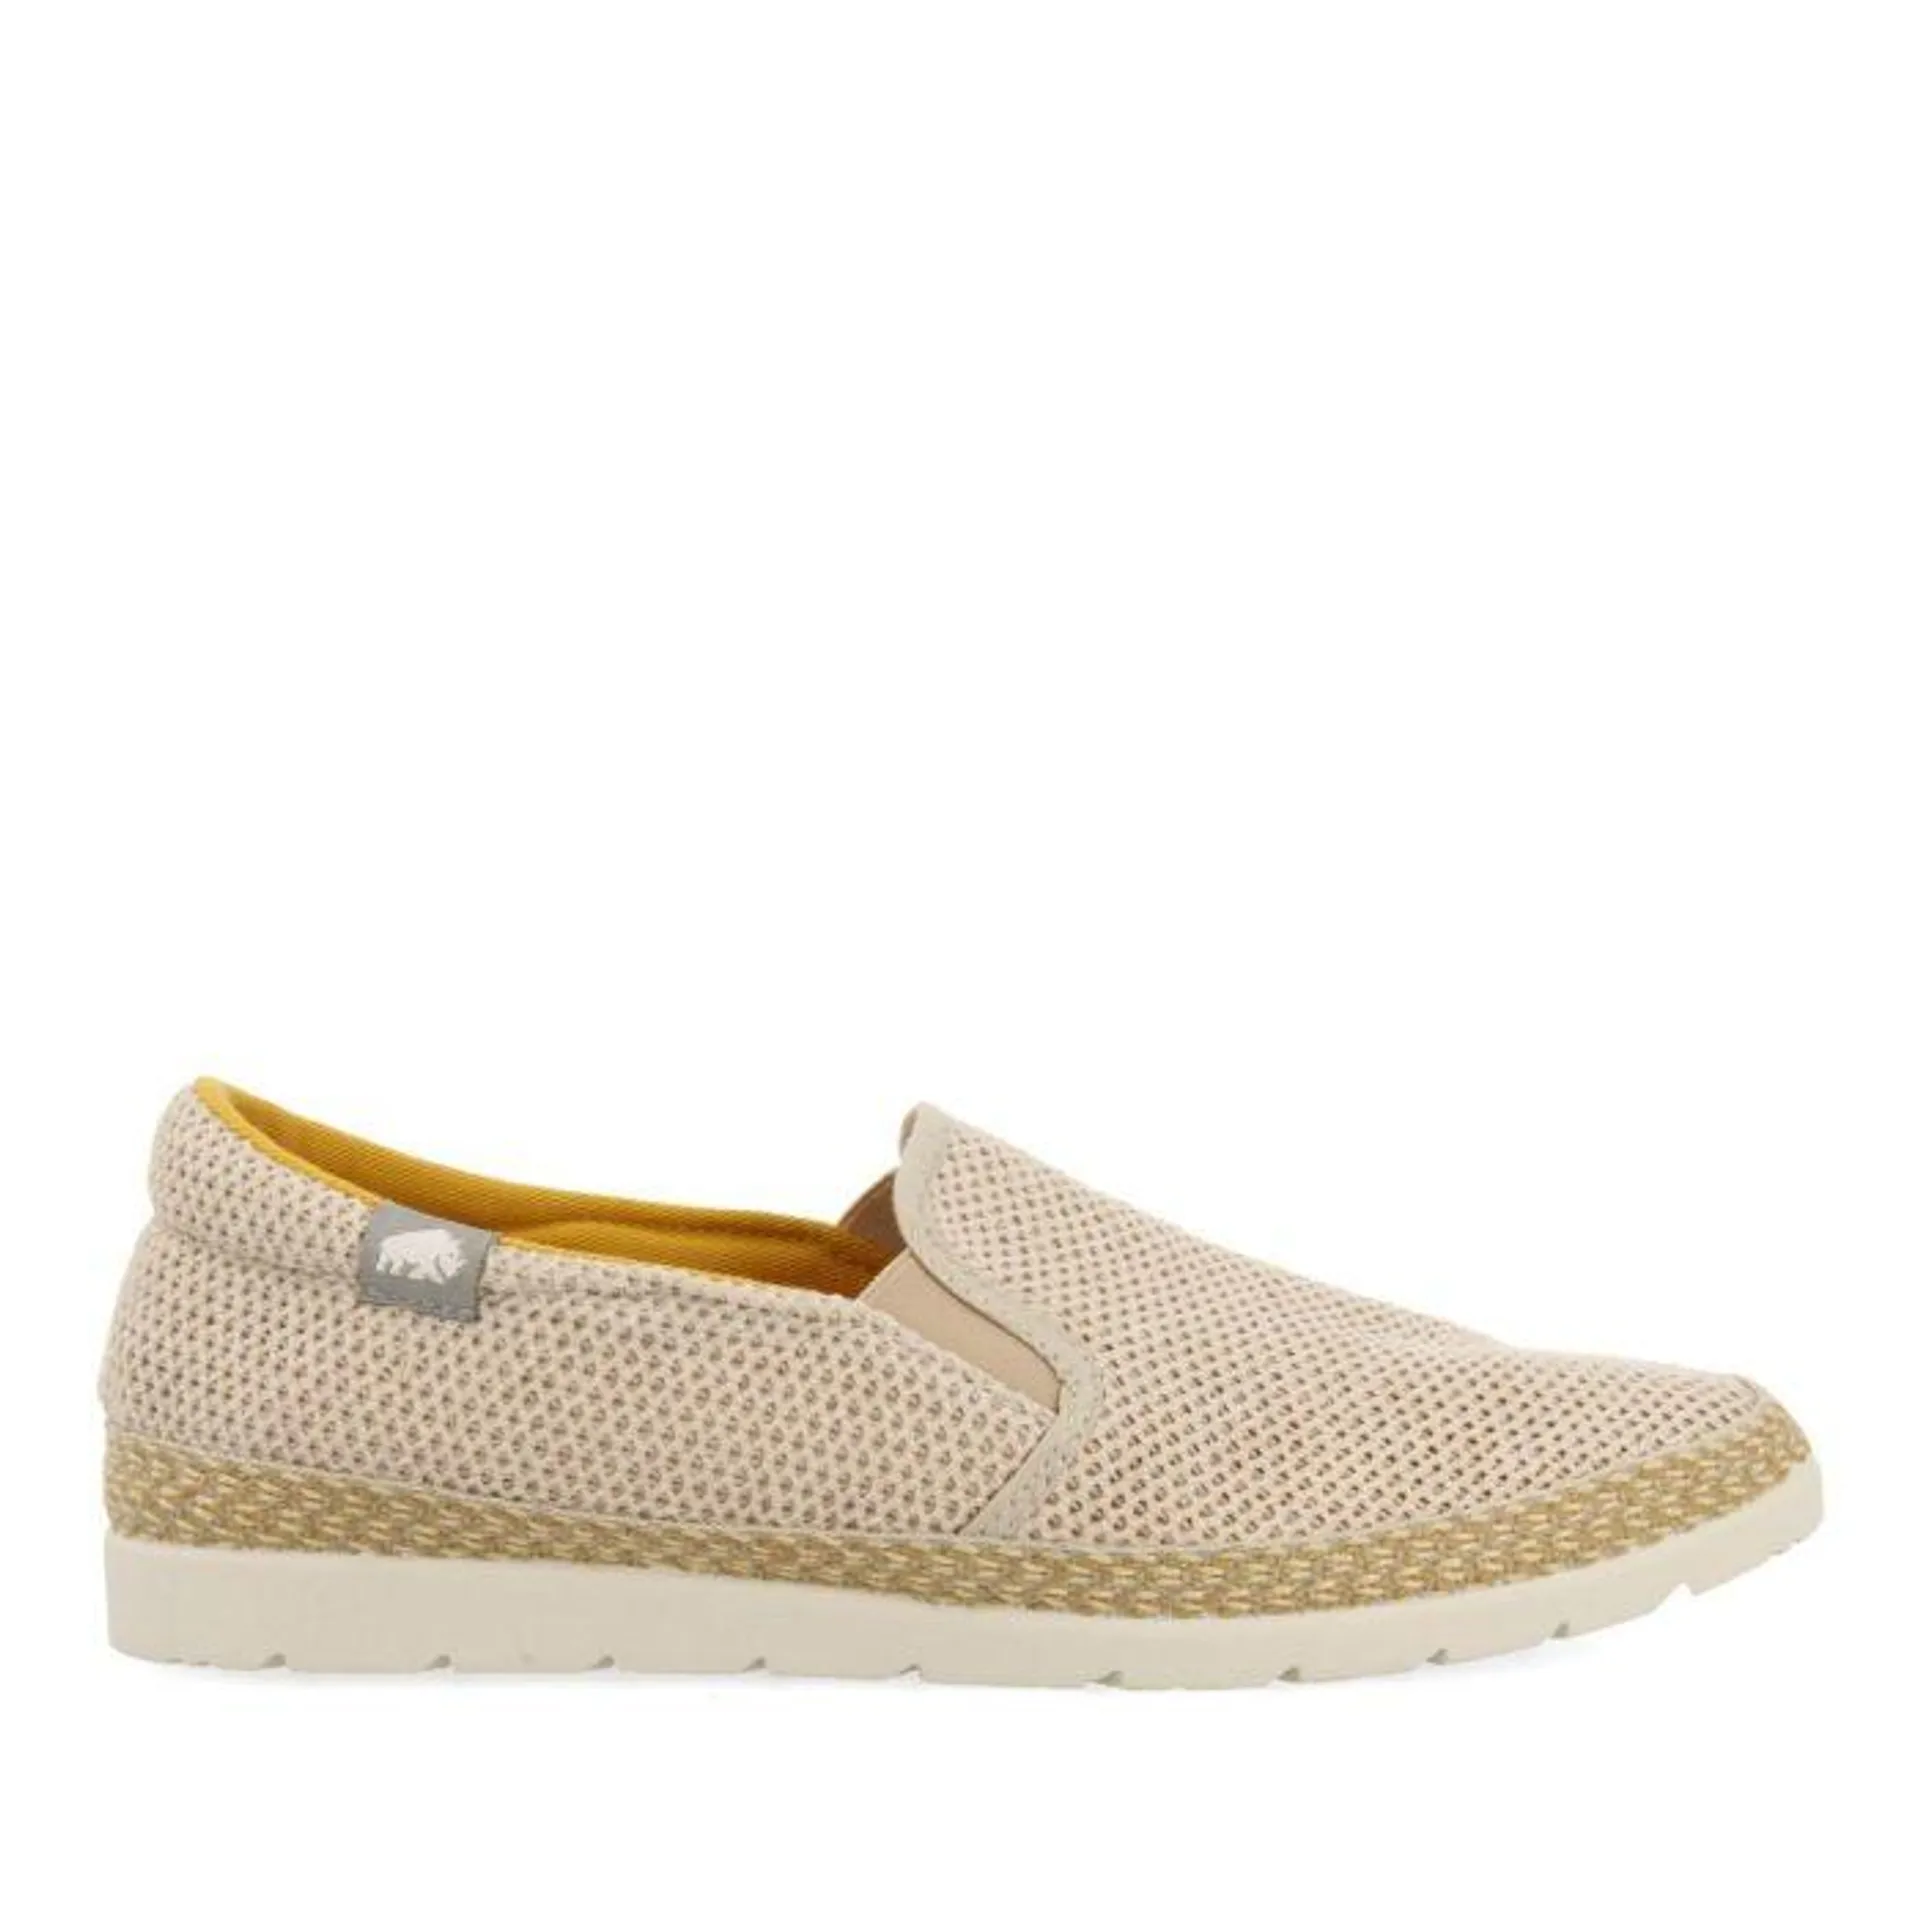 BEIGE MESH ESPADRILLES WITH RECYCLED COTTON FOR MEN YACOLT